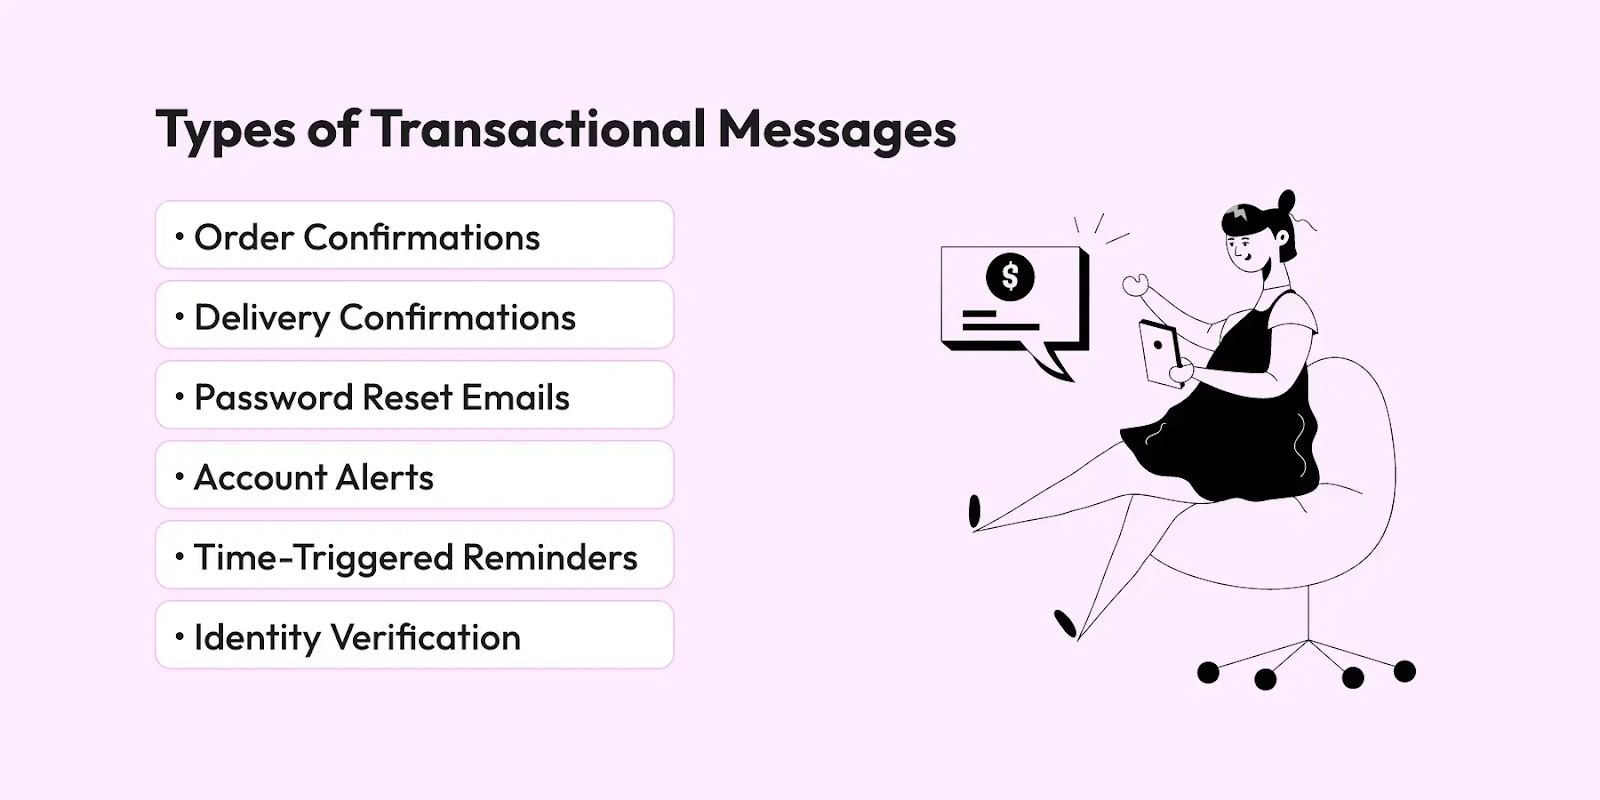 Types of transactional messages including order confirmations, accounts alerts, etc. 